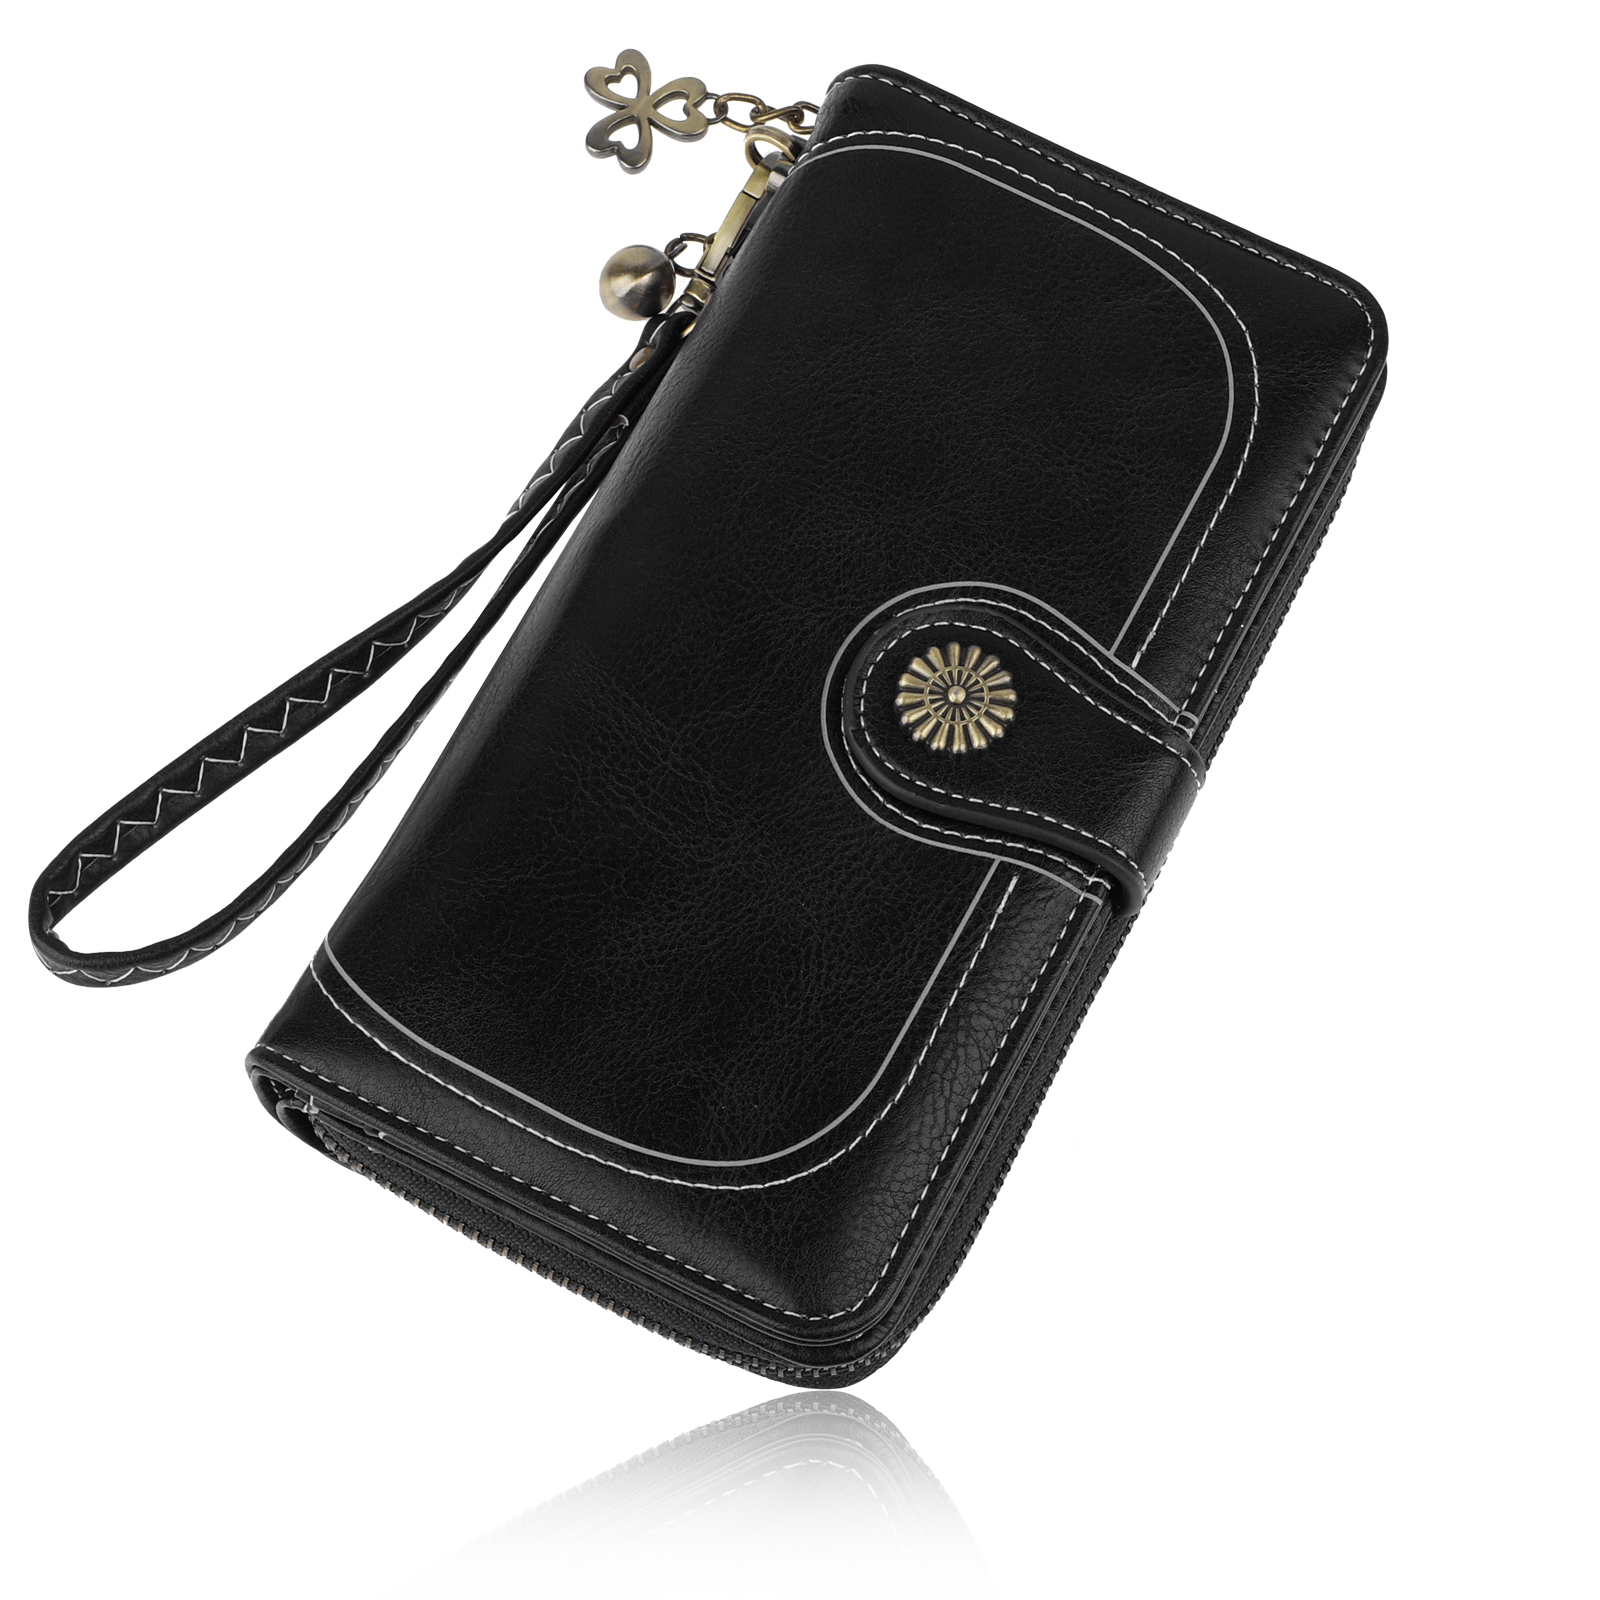 Tool Bag Women's Black Leather Wallet Small Compact Rfid Blocking ...